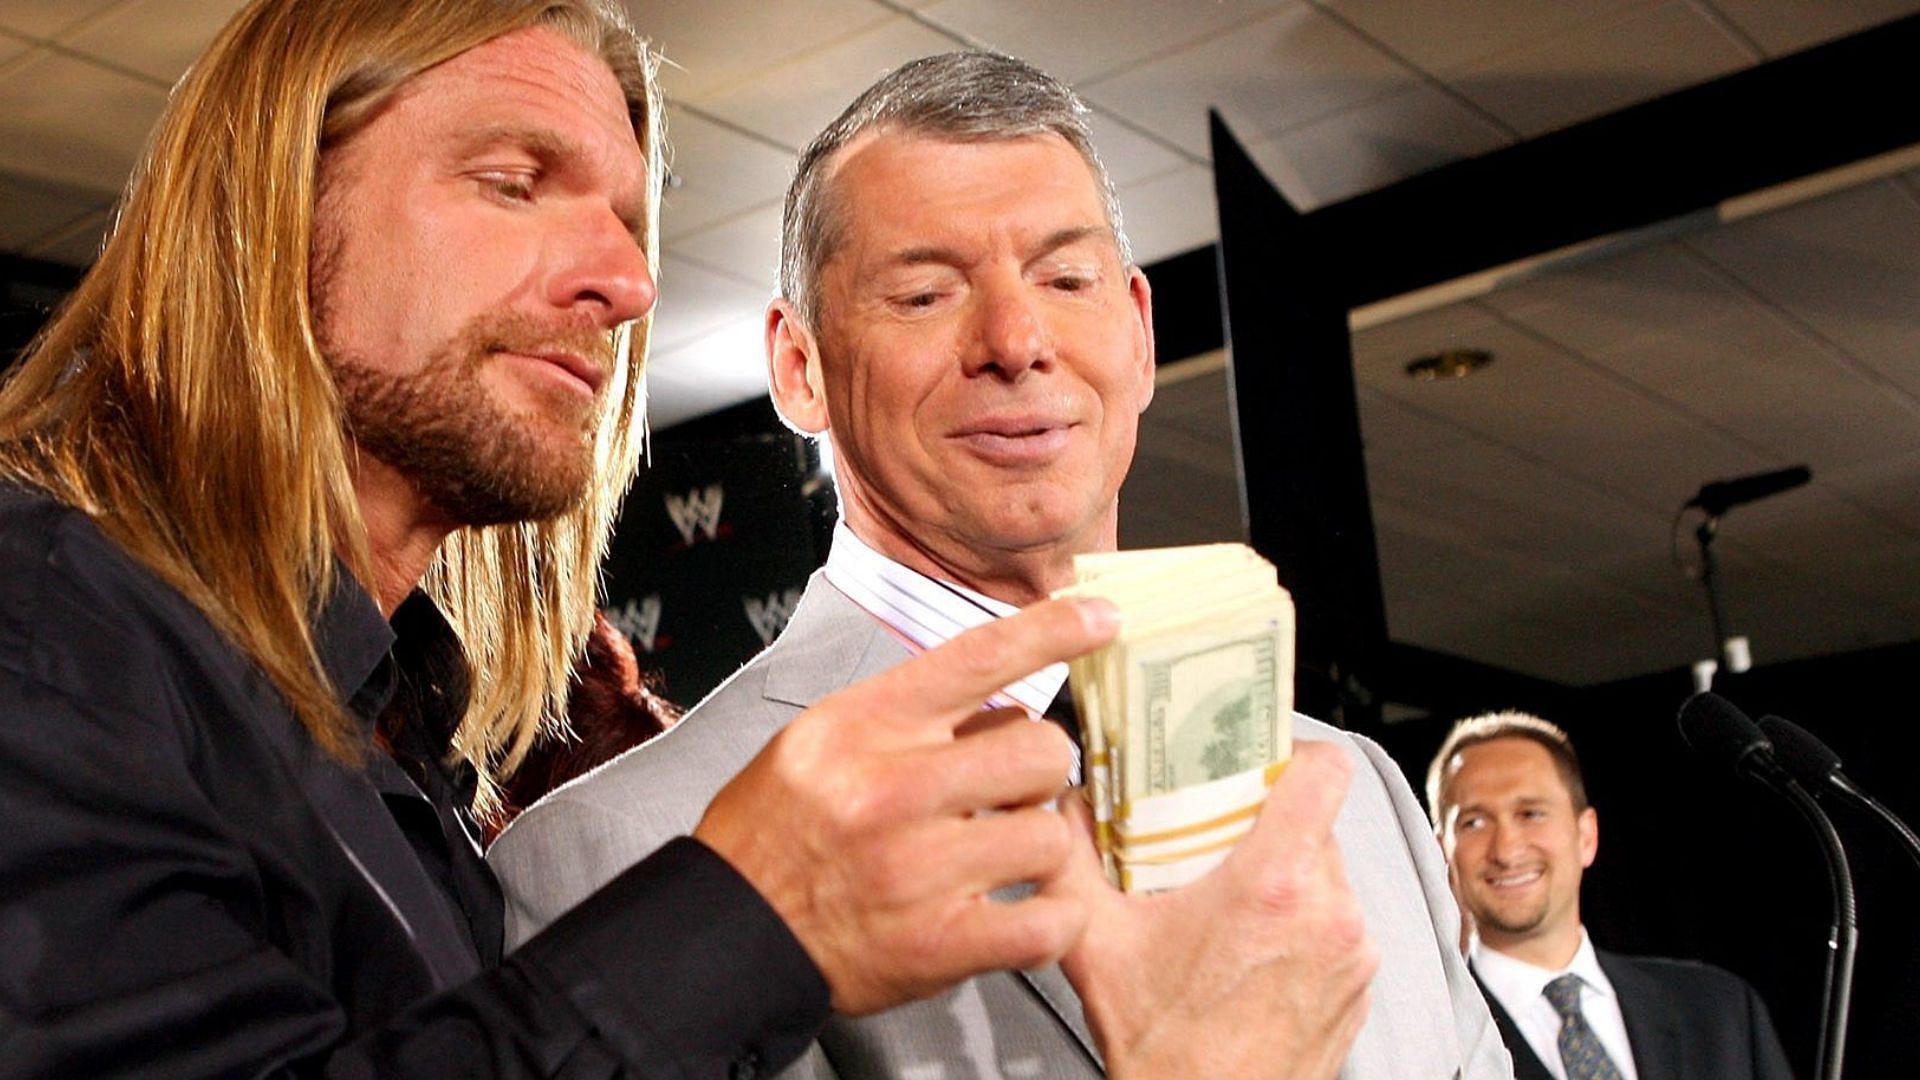 Other than being in-laws, Triple H was a trusted star under Vince McMahon